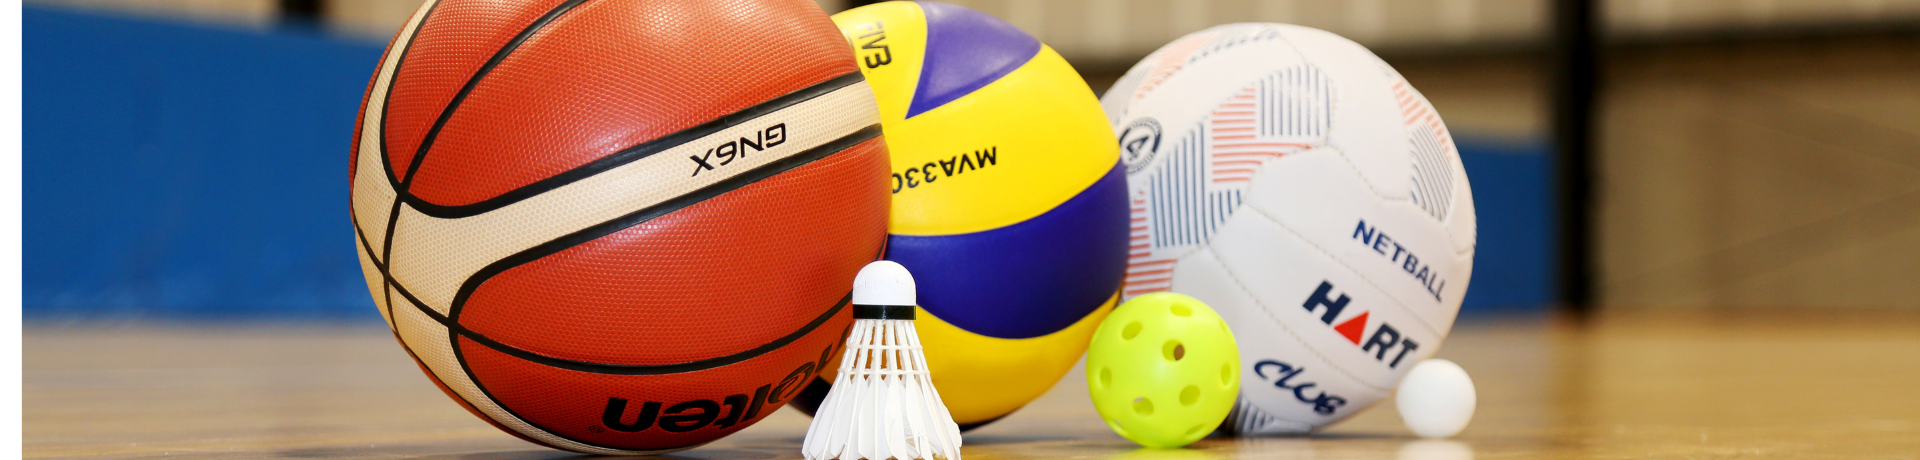 Sport balls lined up on court